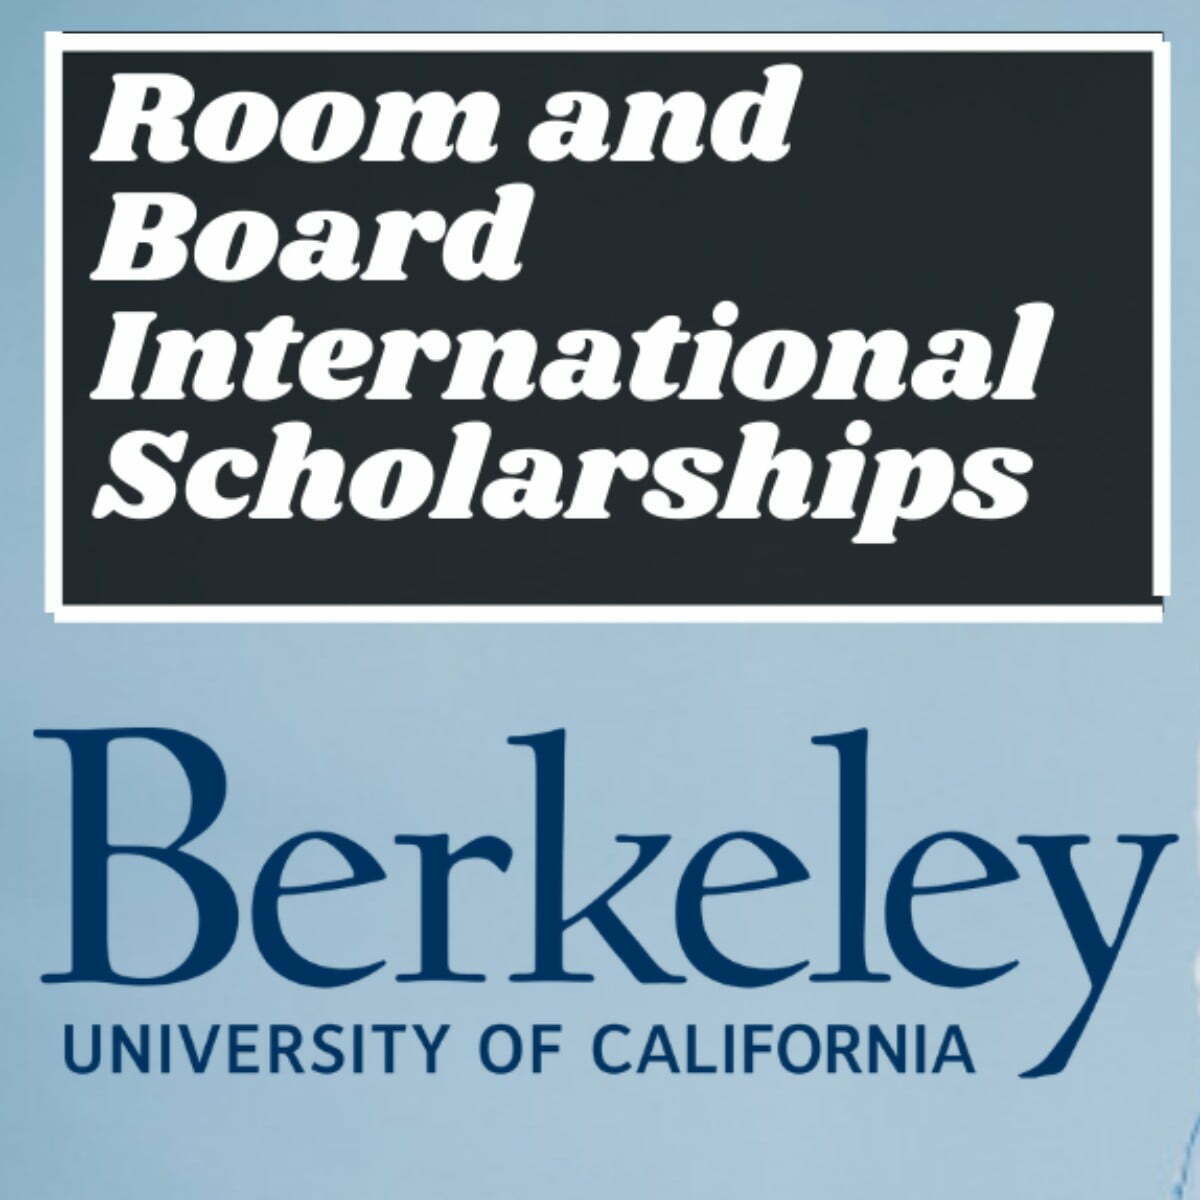 University of California Room and Board Scholarships 2023 for International Students